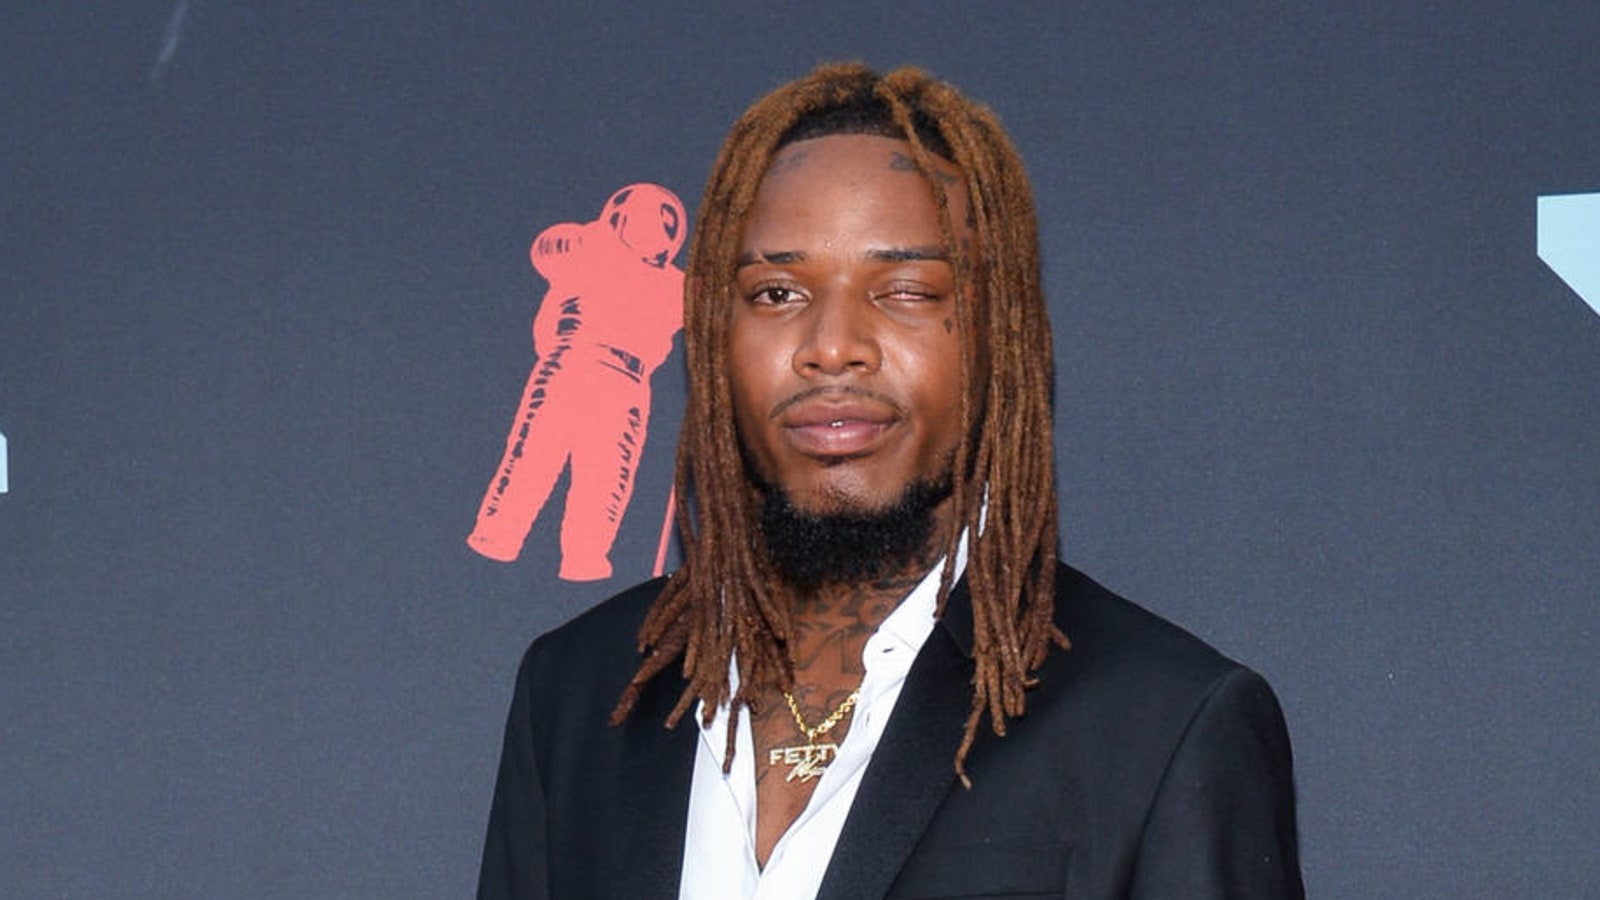 Fetty Wap arrested ahead of Rolling Loud on federal drug trafficking charges